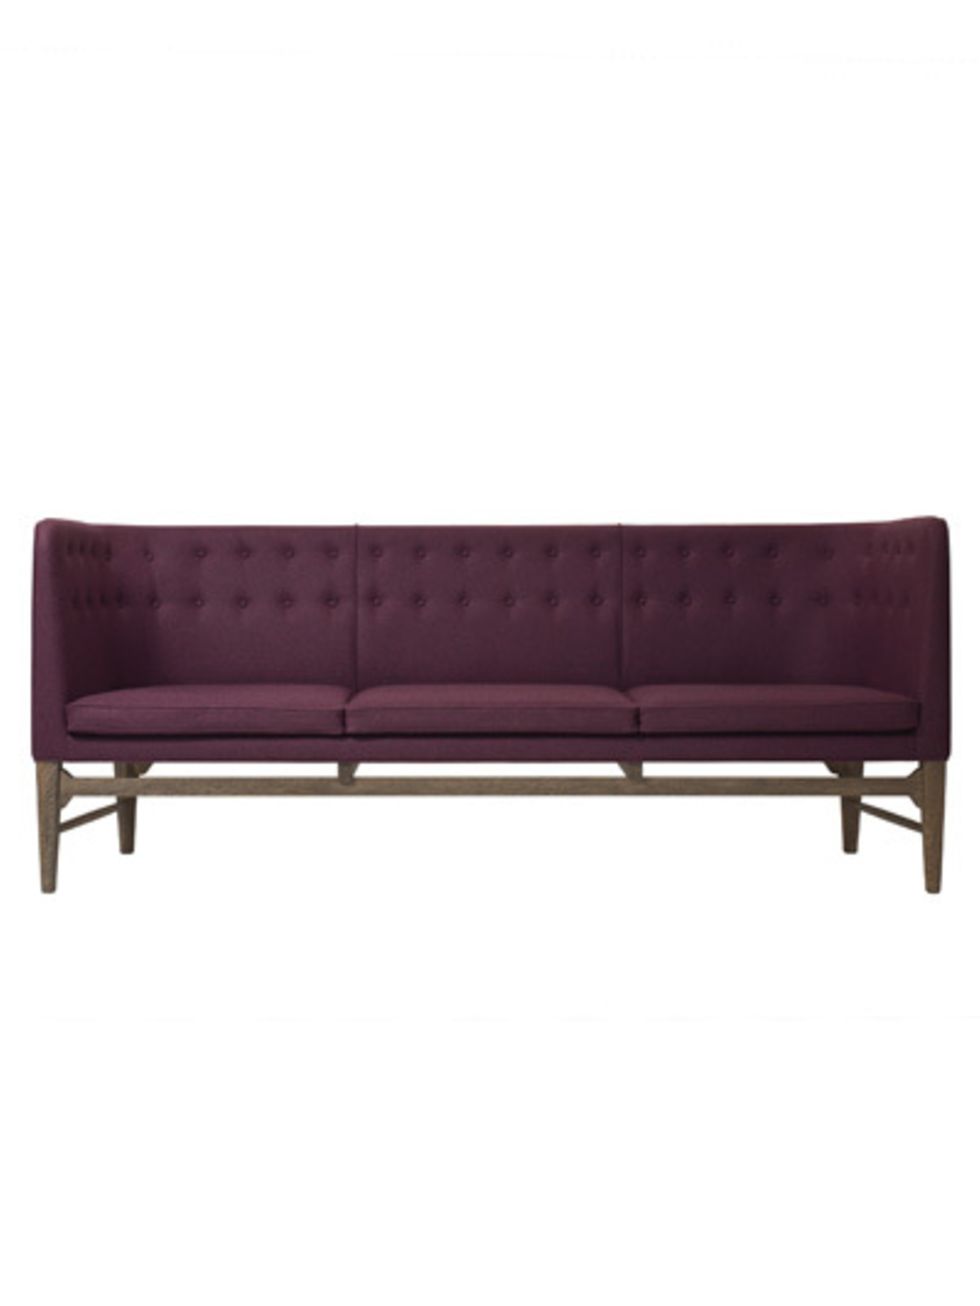 Brown, Wood, Couch, Furniture, Line, Outdoor furniture, Rectangle, Hardwood, Maroon, Tan, 